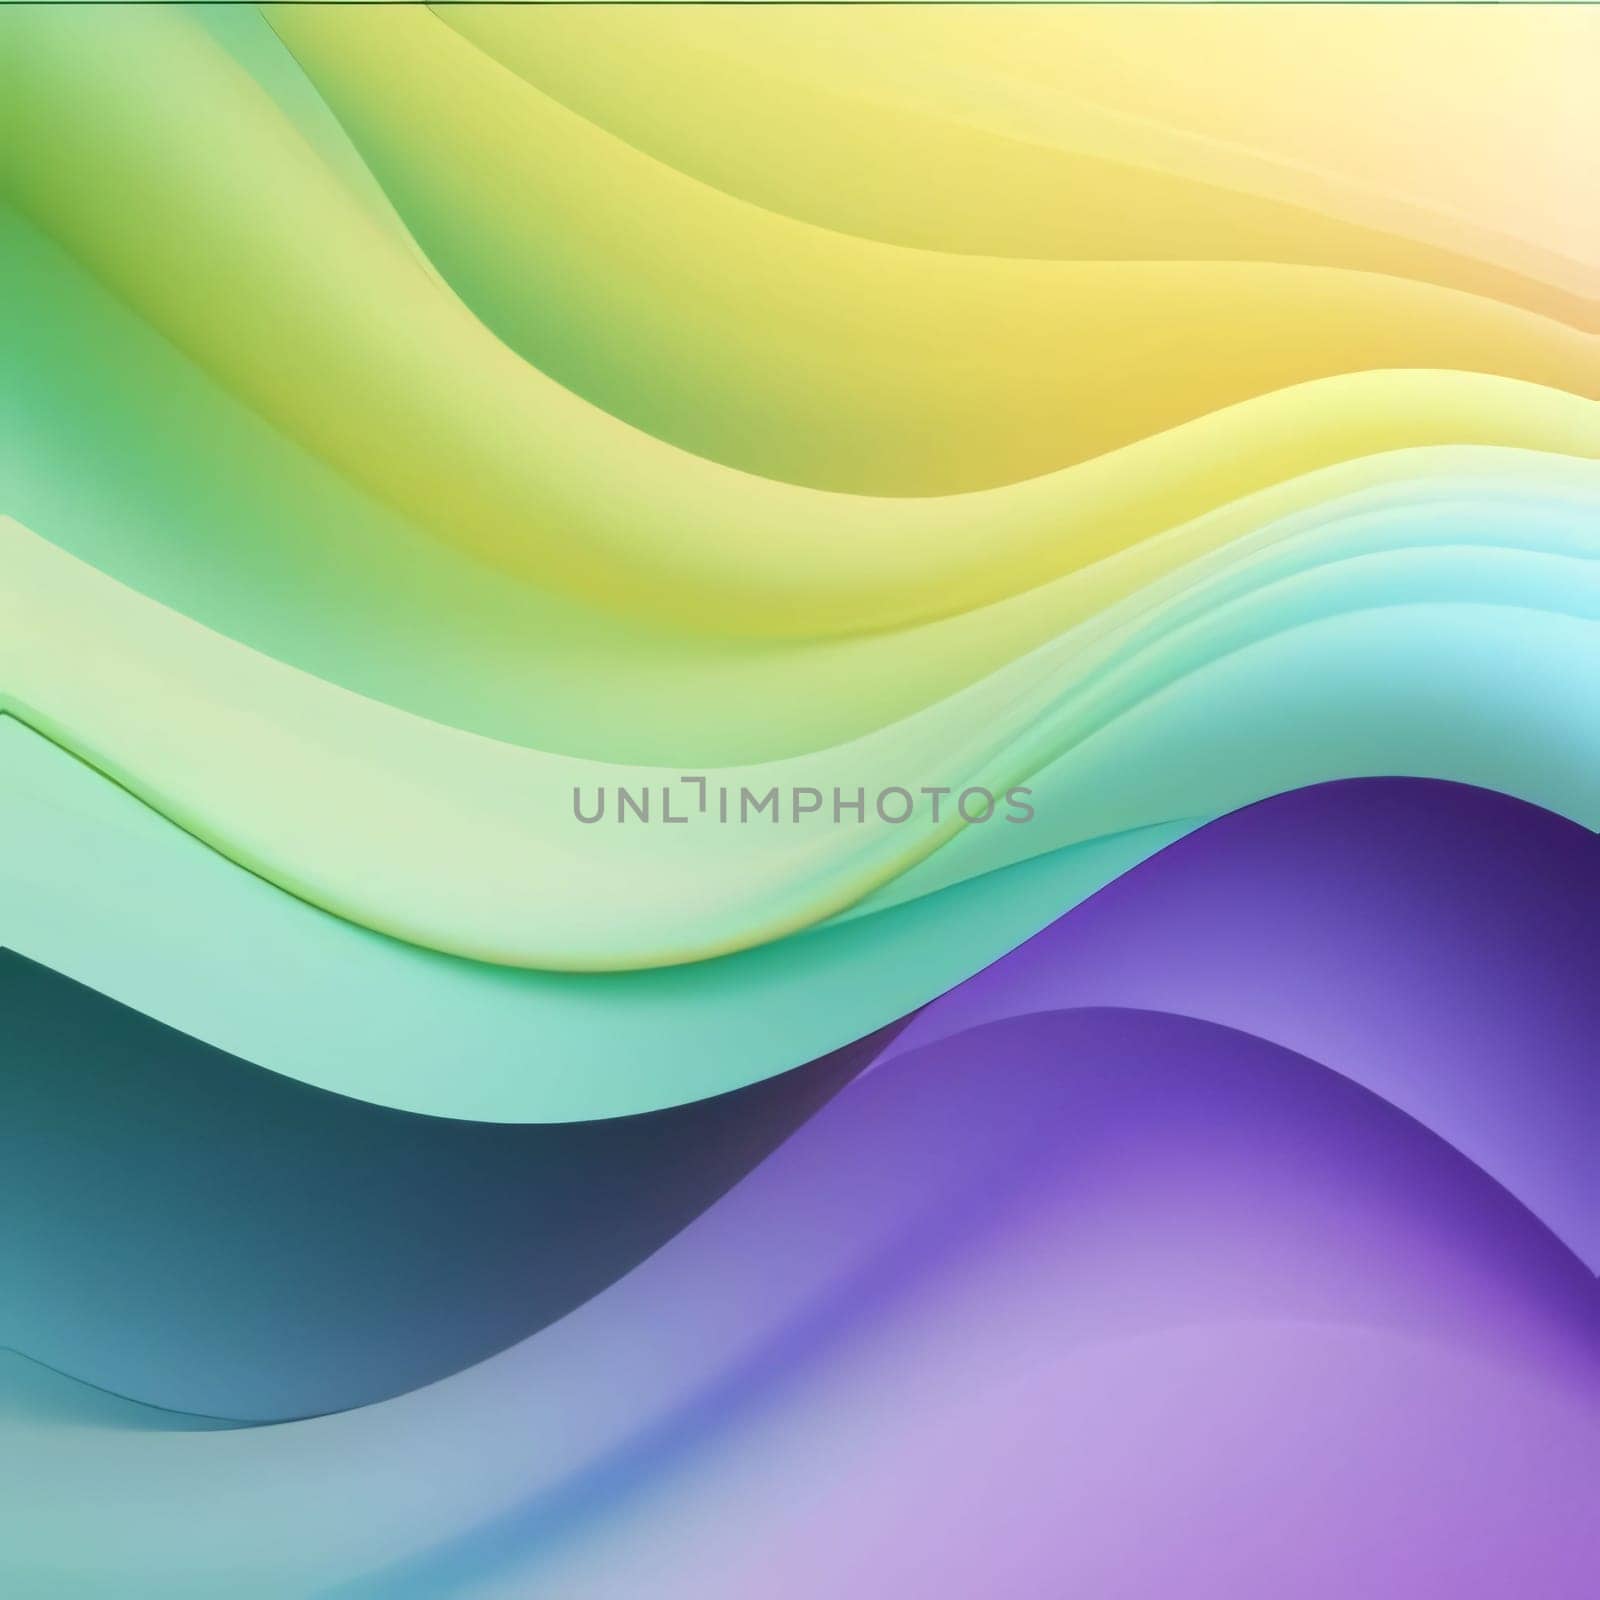 Abstract background design: abstract background with smooth wavy lines in green and purple colors